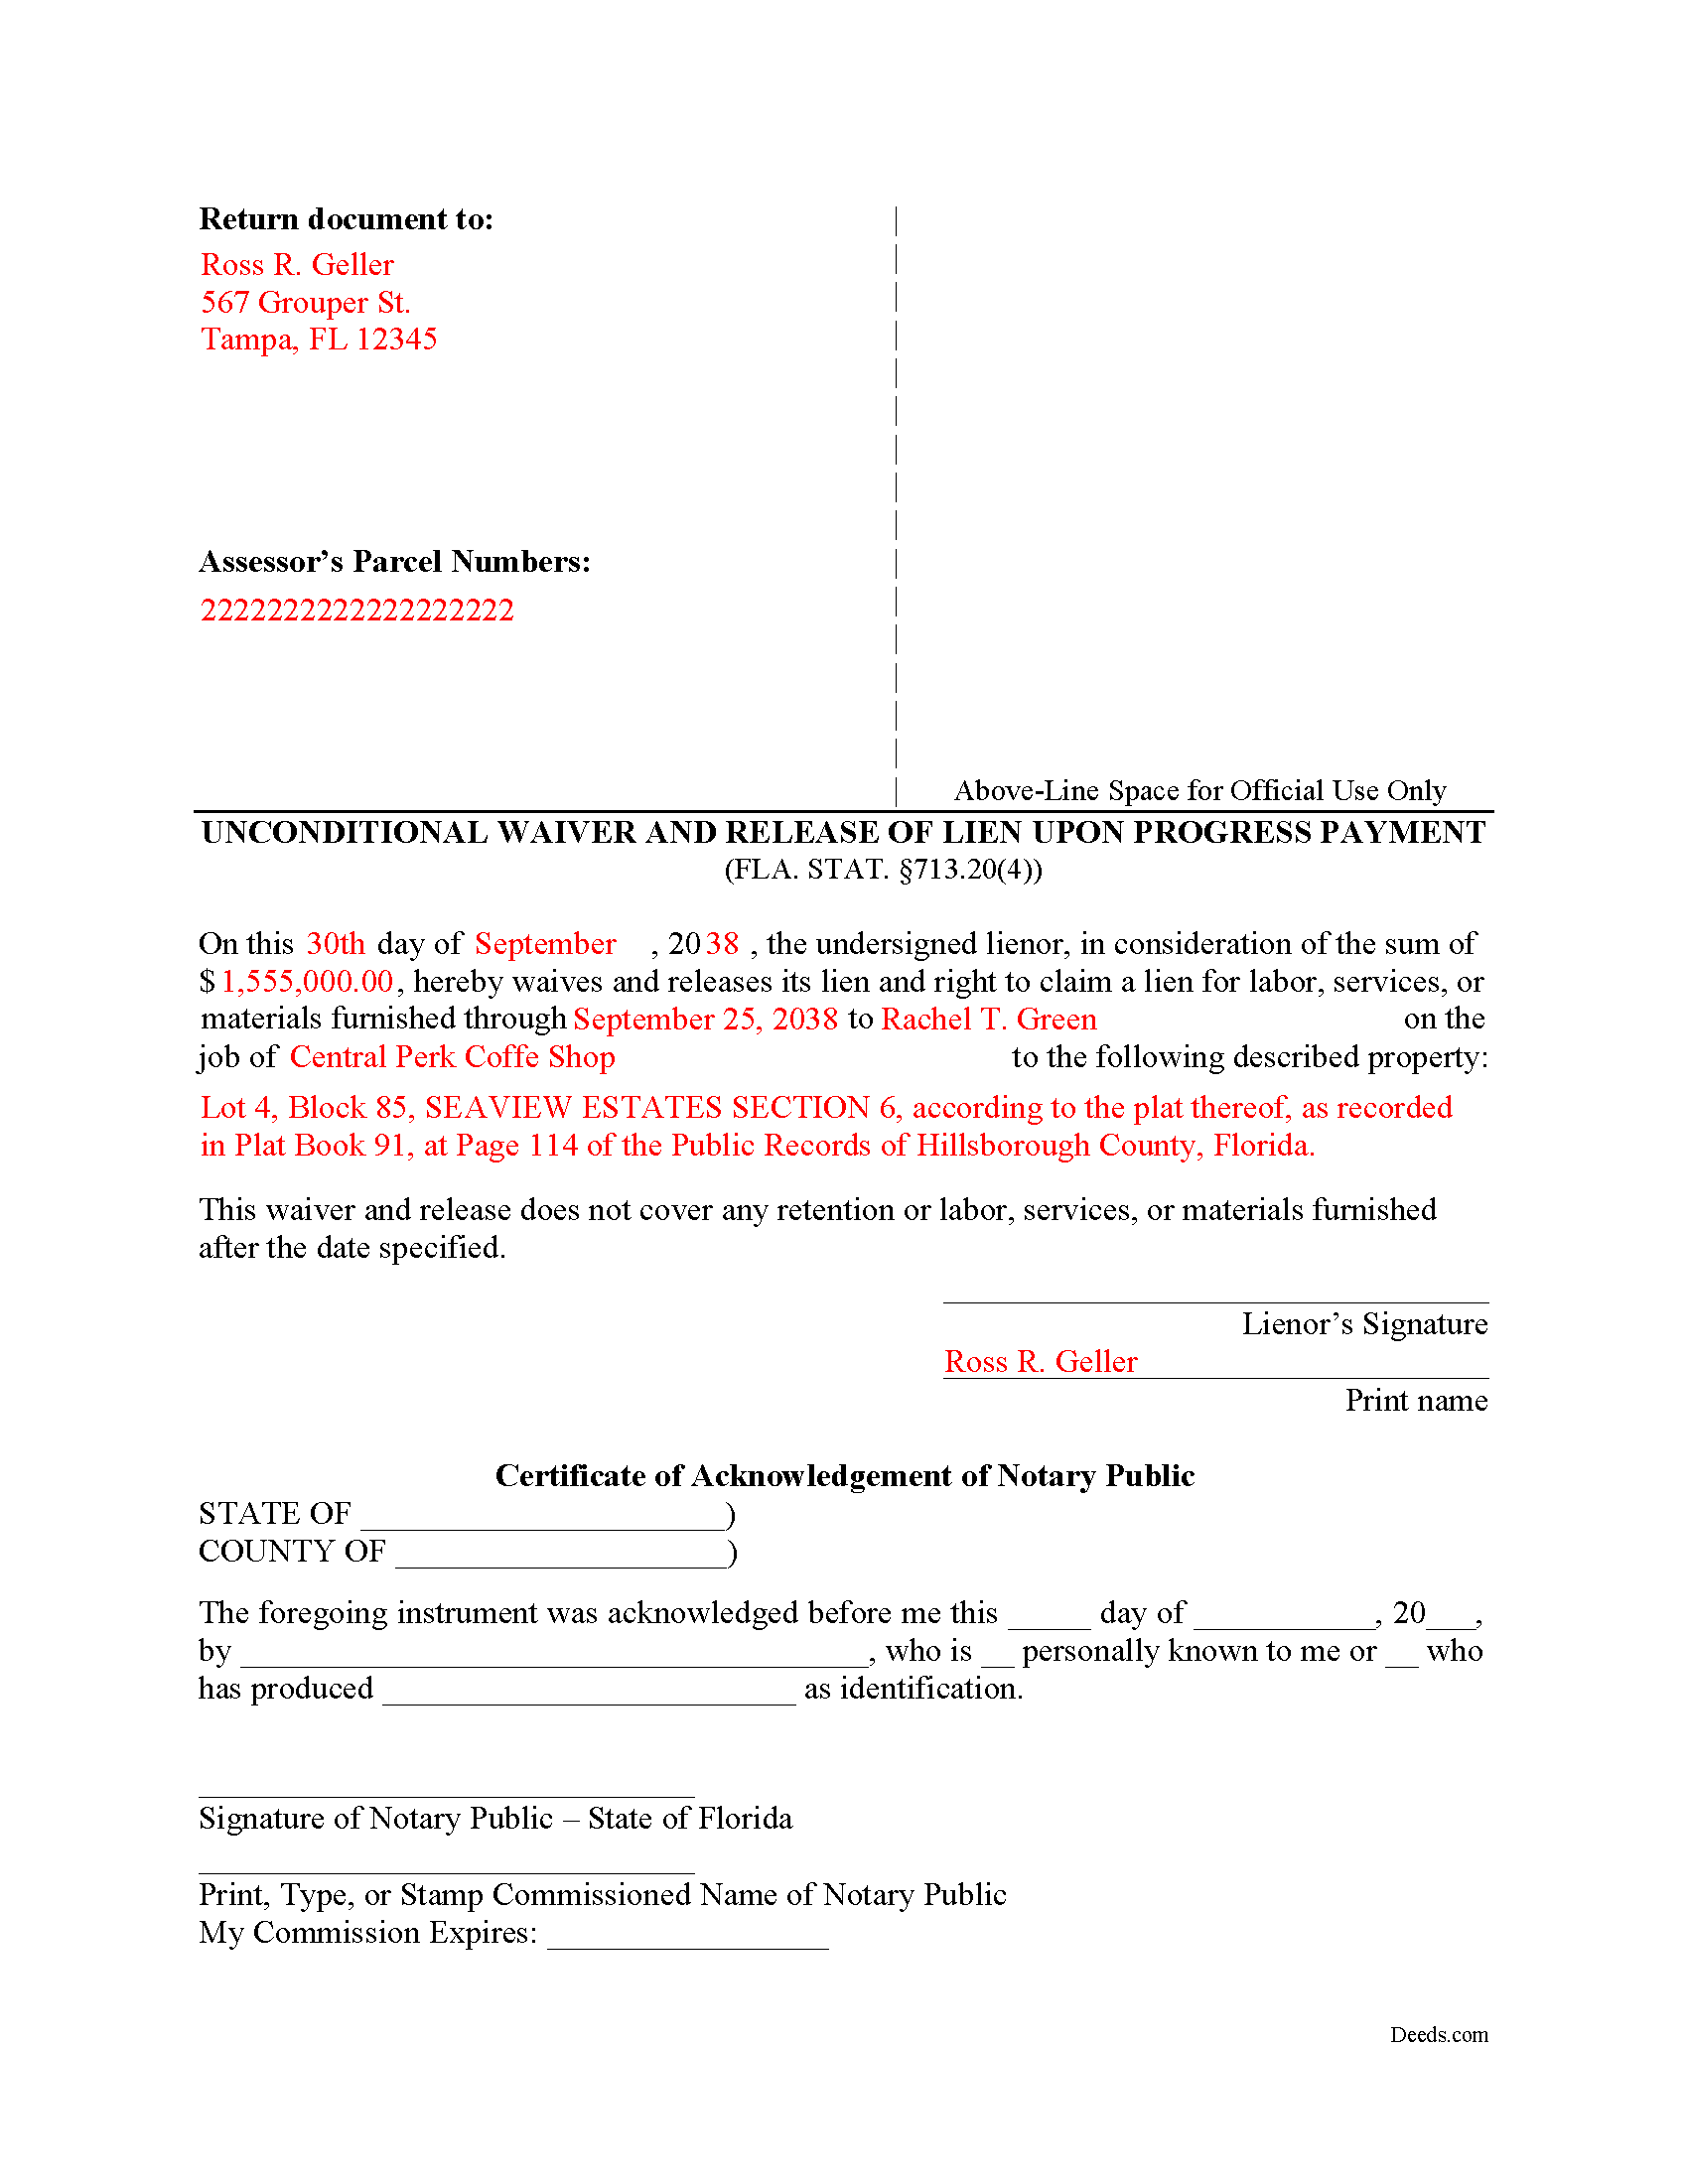 Completed Example of the Unconditional Waiver and Release of Lien upon Progress Payment Form